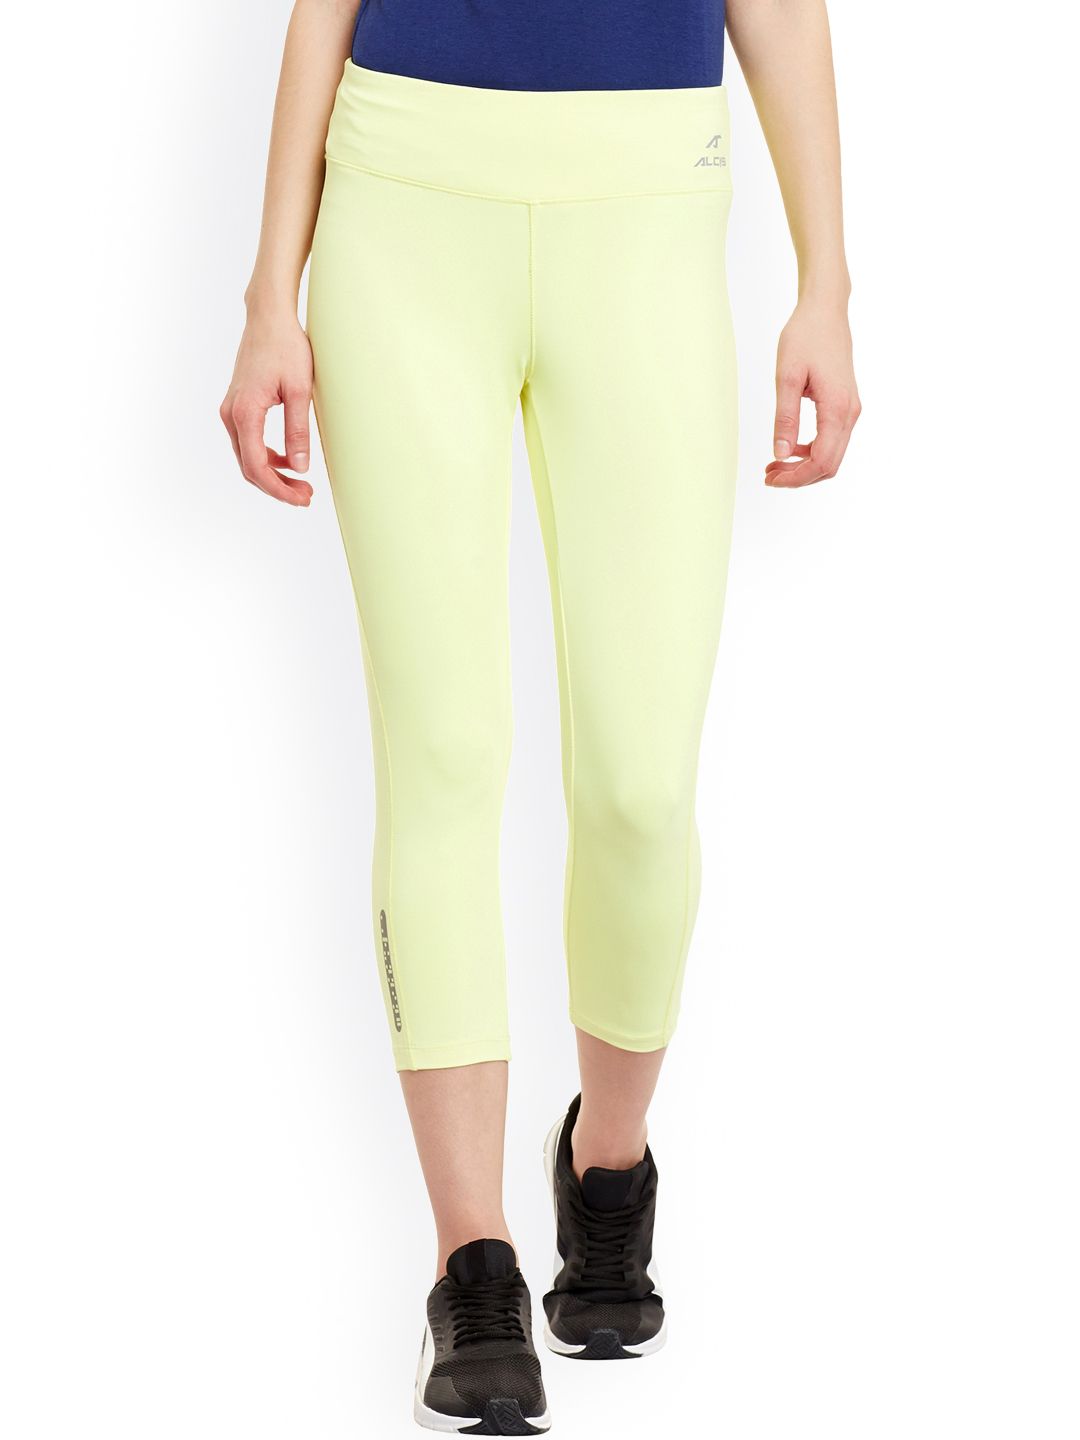 Alcis Yellow Core Fit Tights Price in India